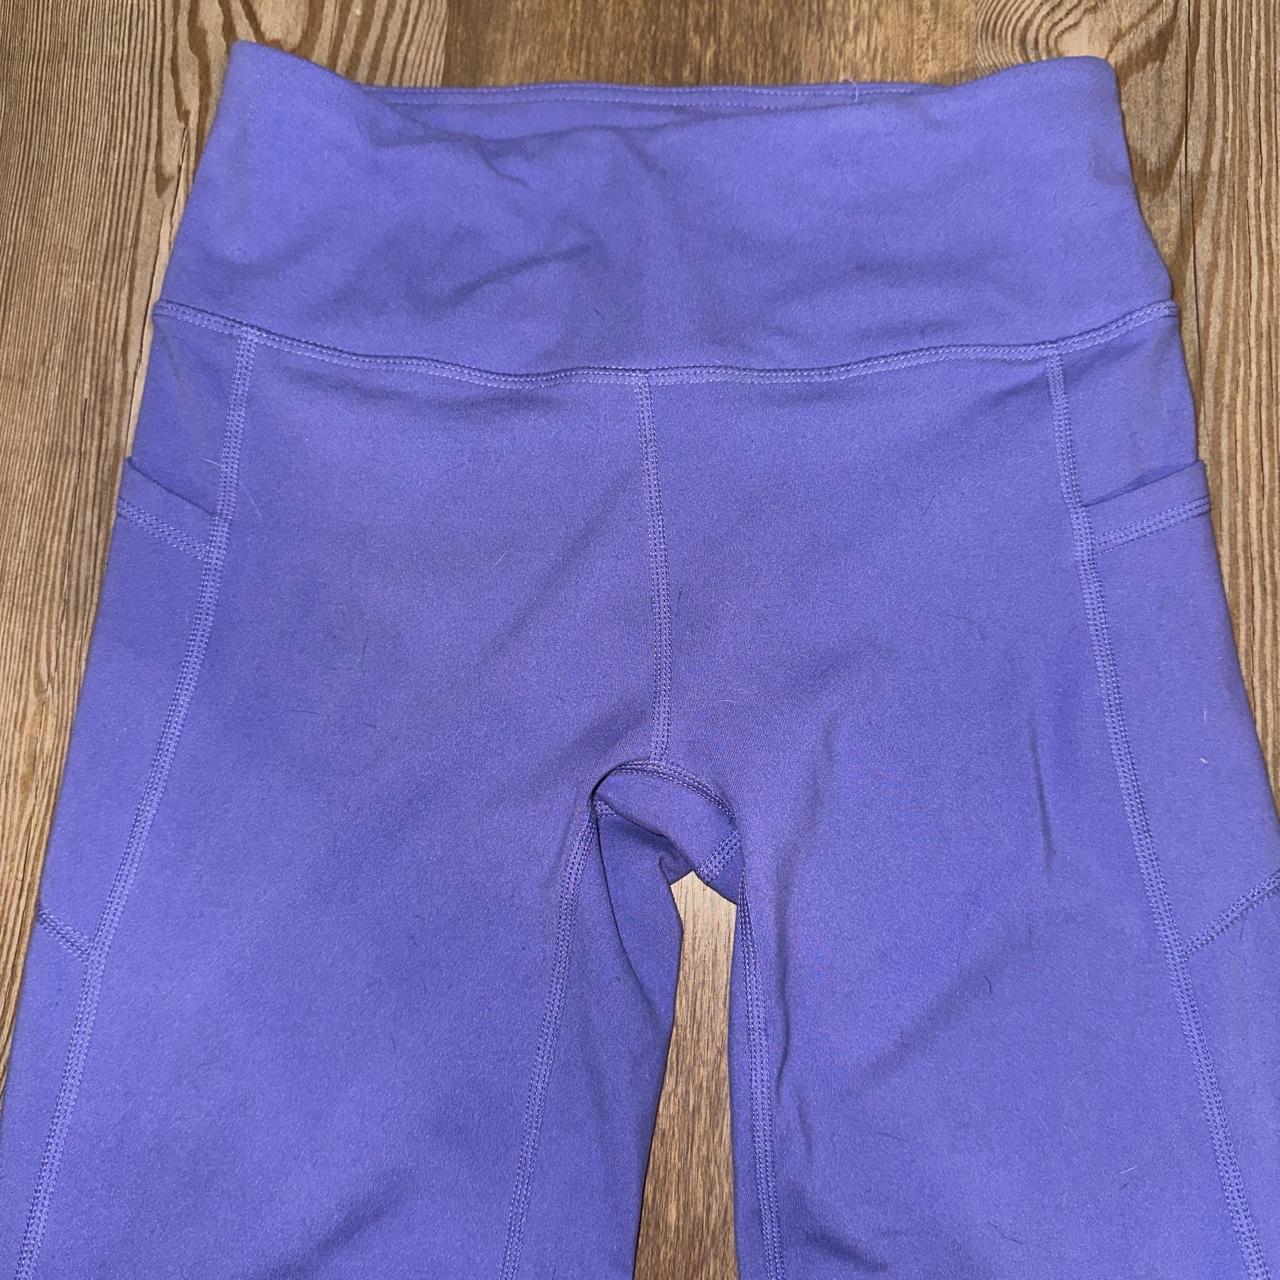 Full length Gaiam leggings with pockets - Size XS - Depop